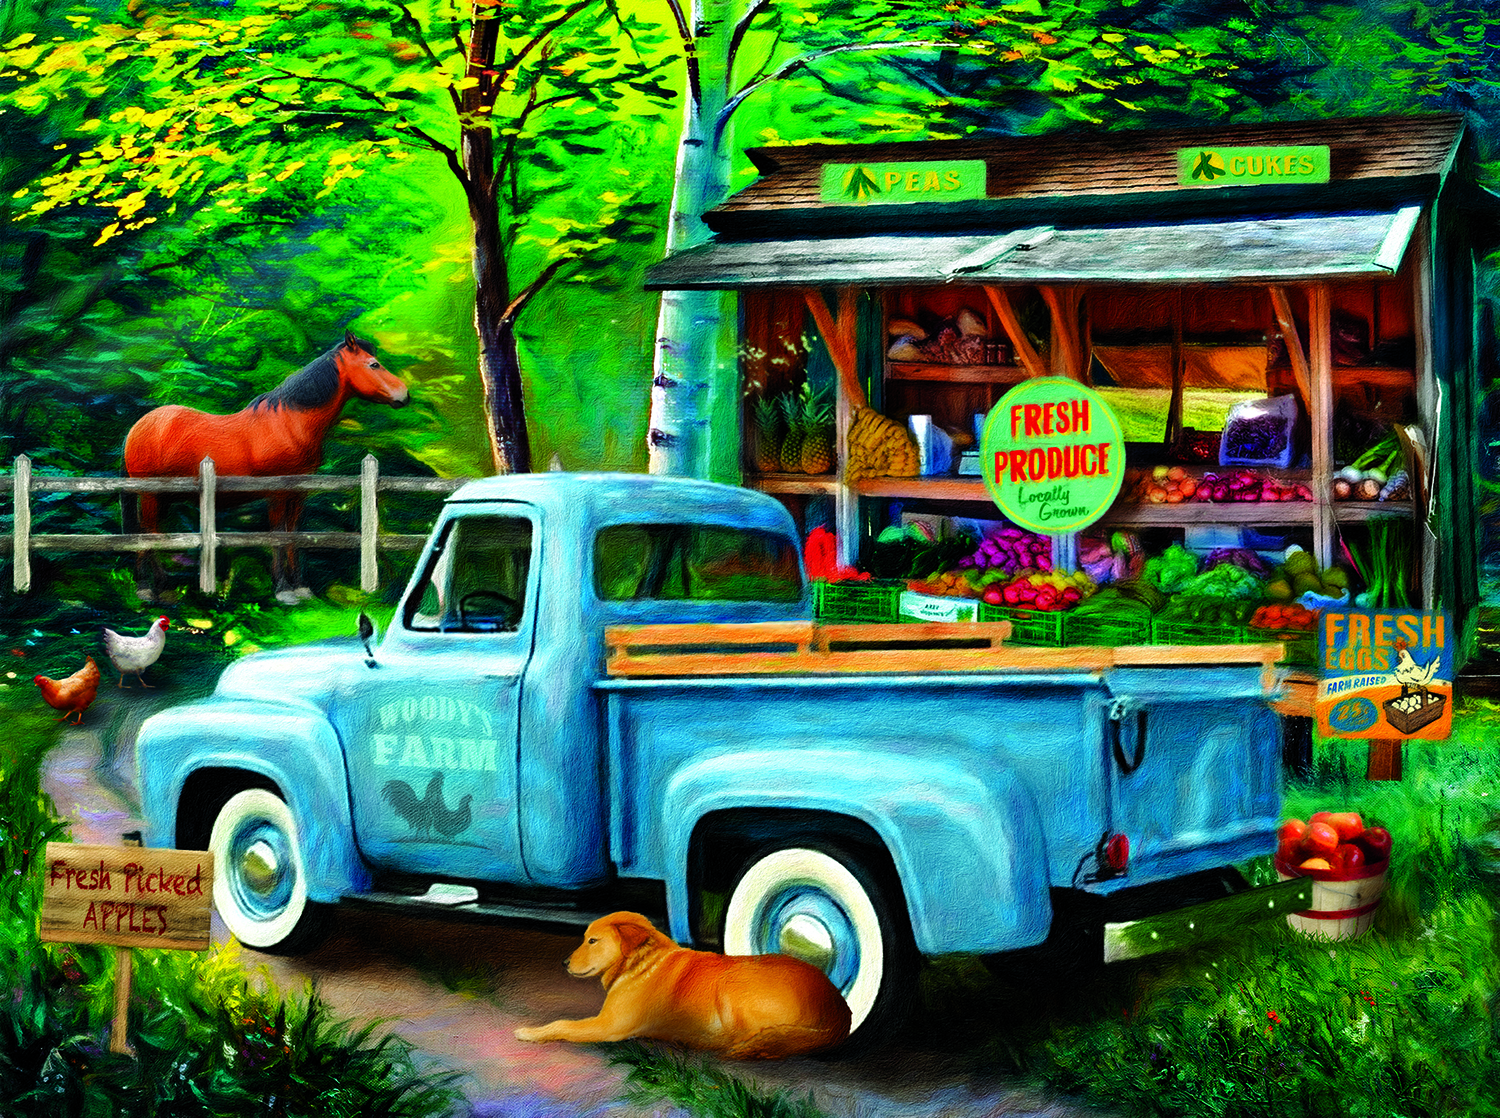 SO-28863 - Woody's Farm Stand